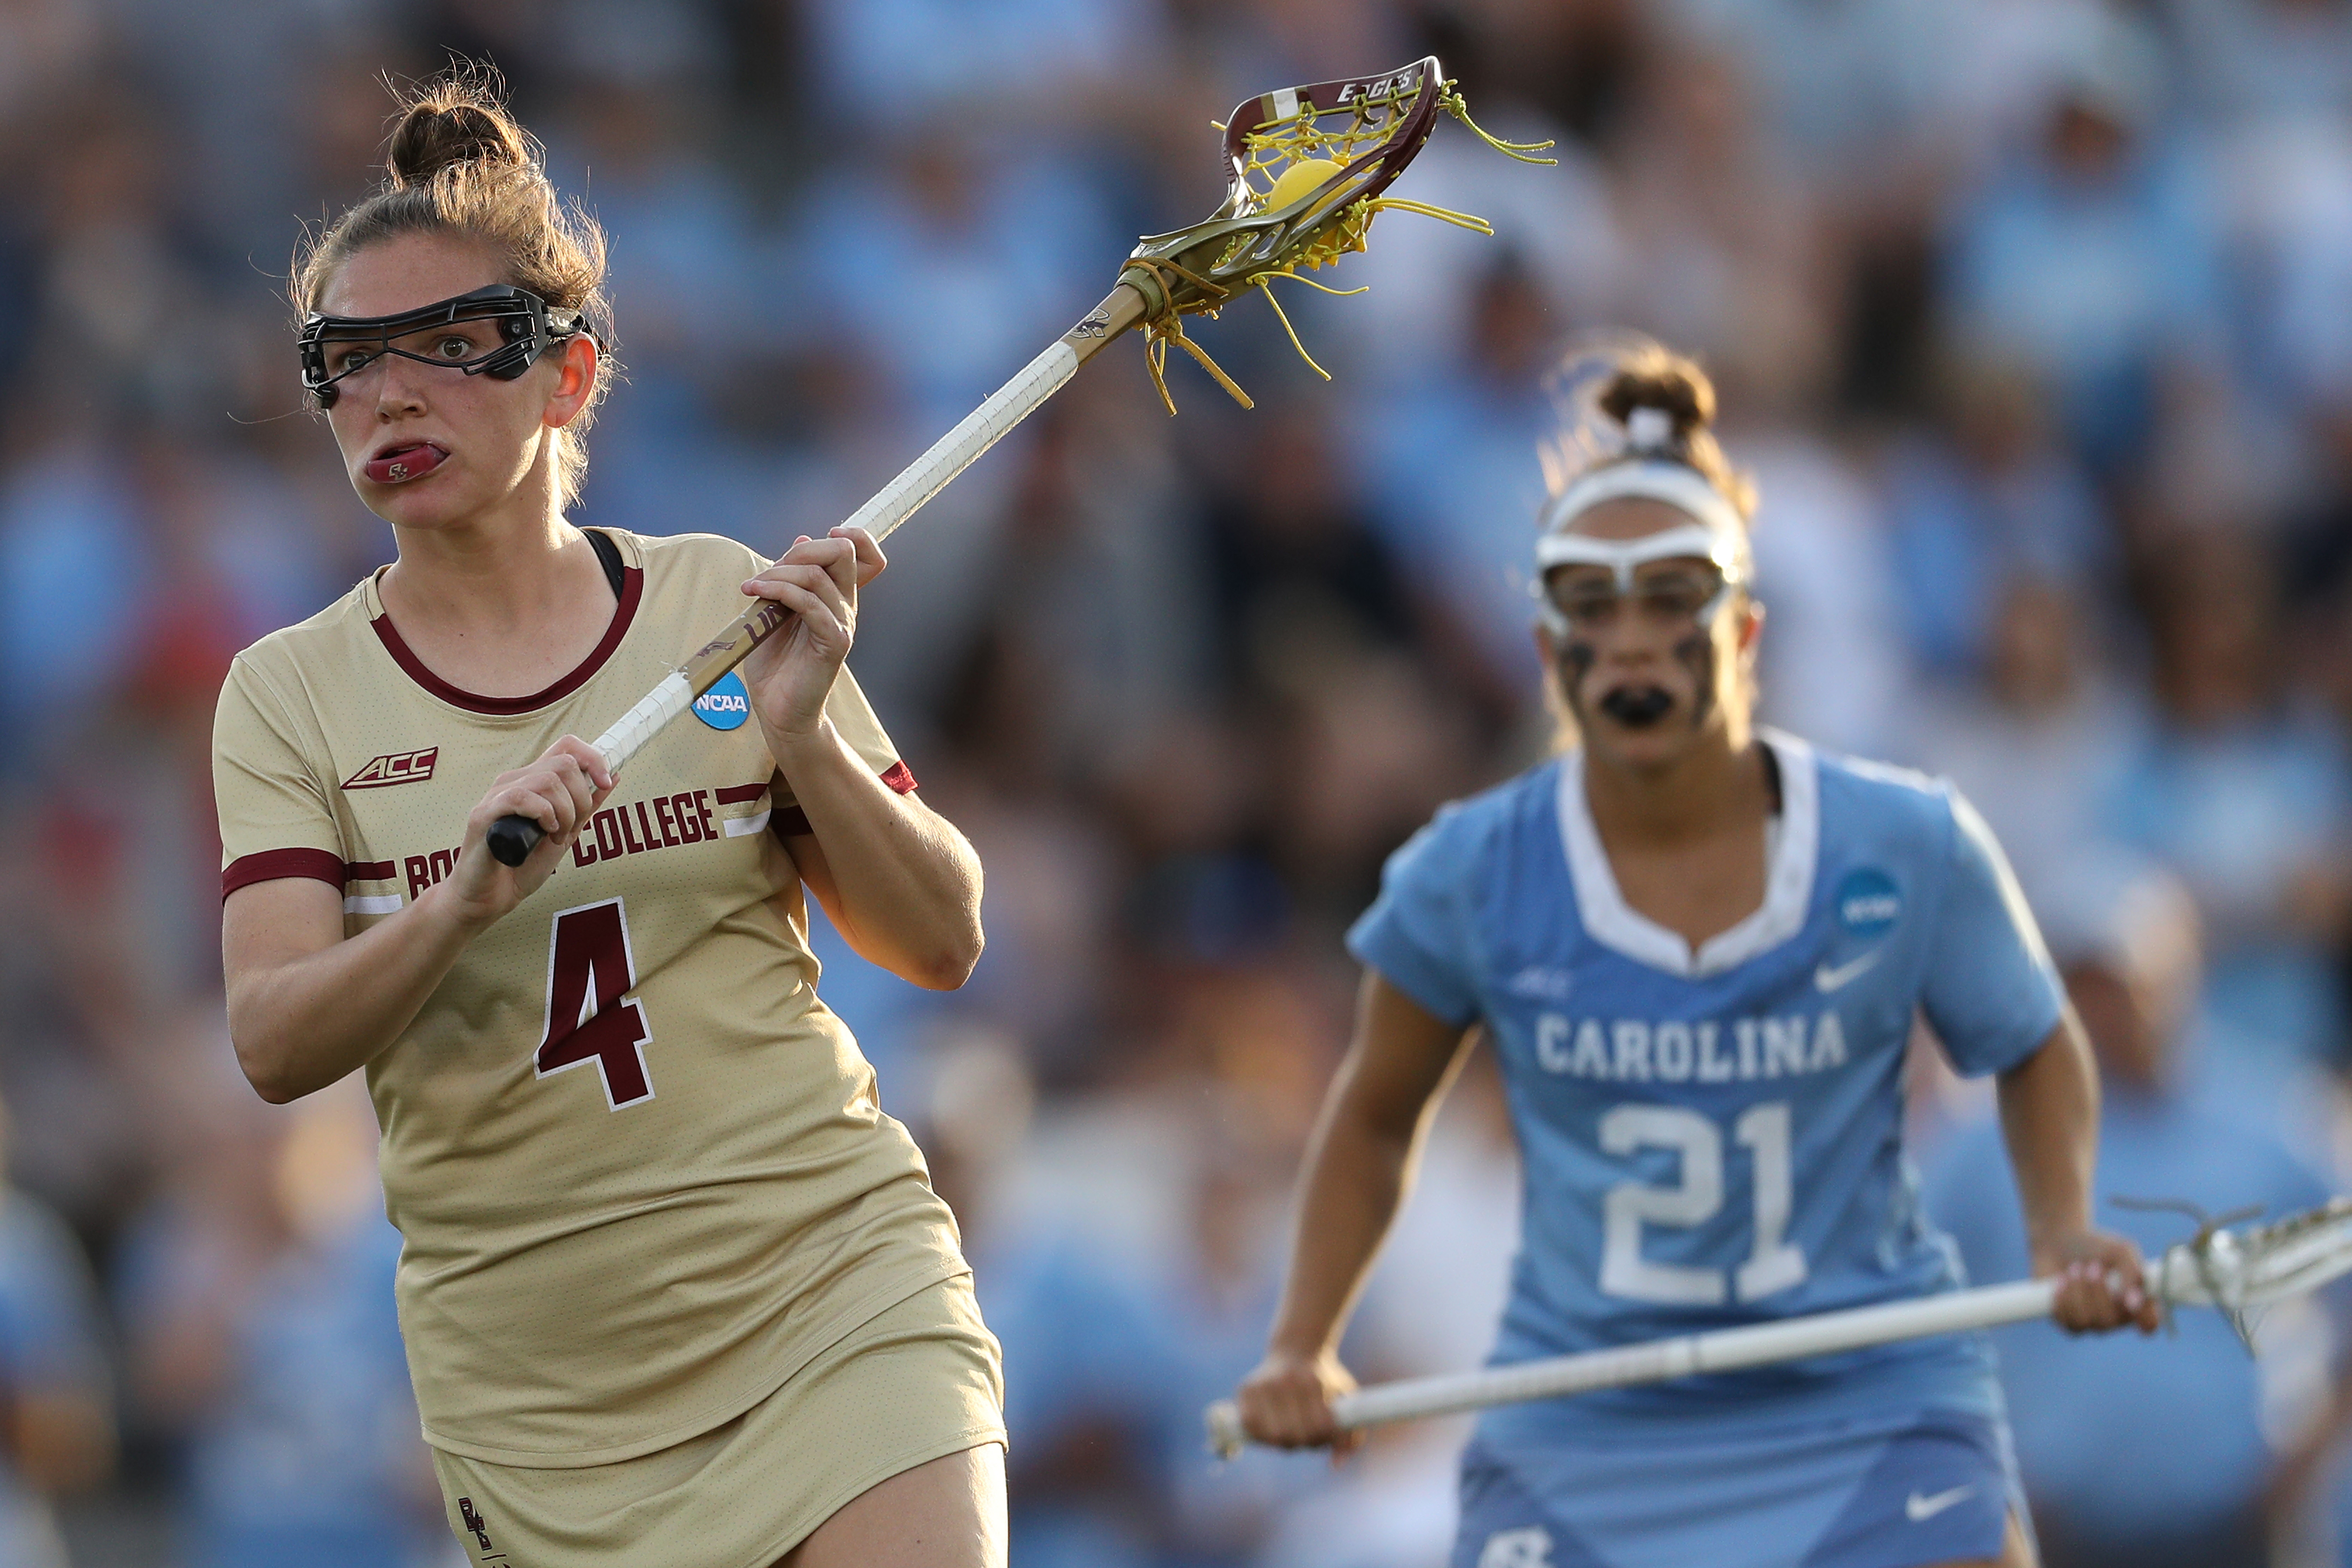 2019 NCAA Division I Women’s Lacrosse Championship - Semifinals